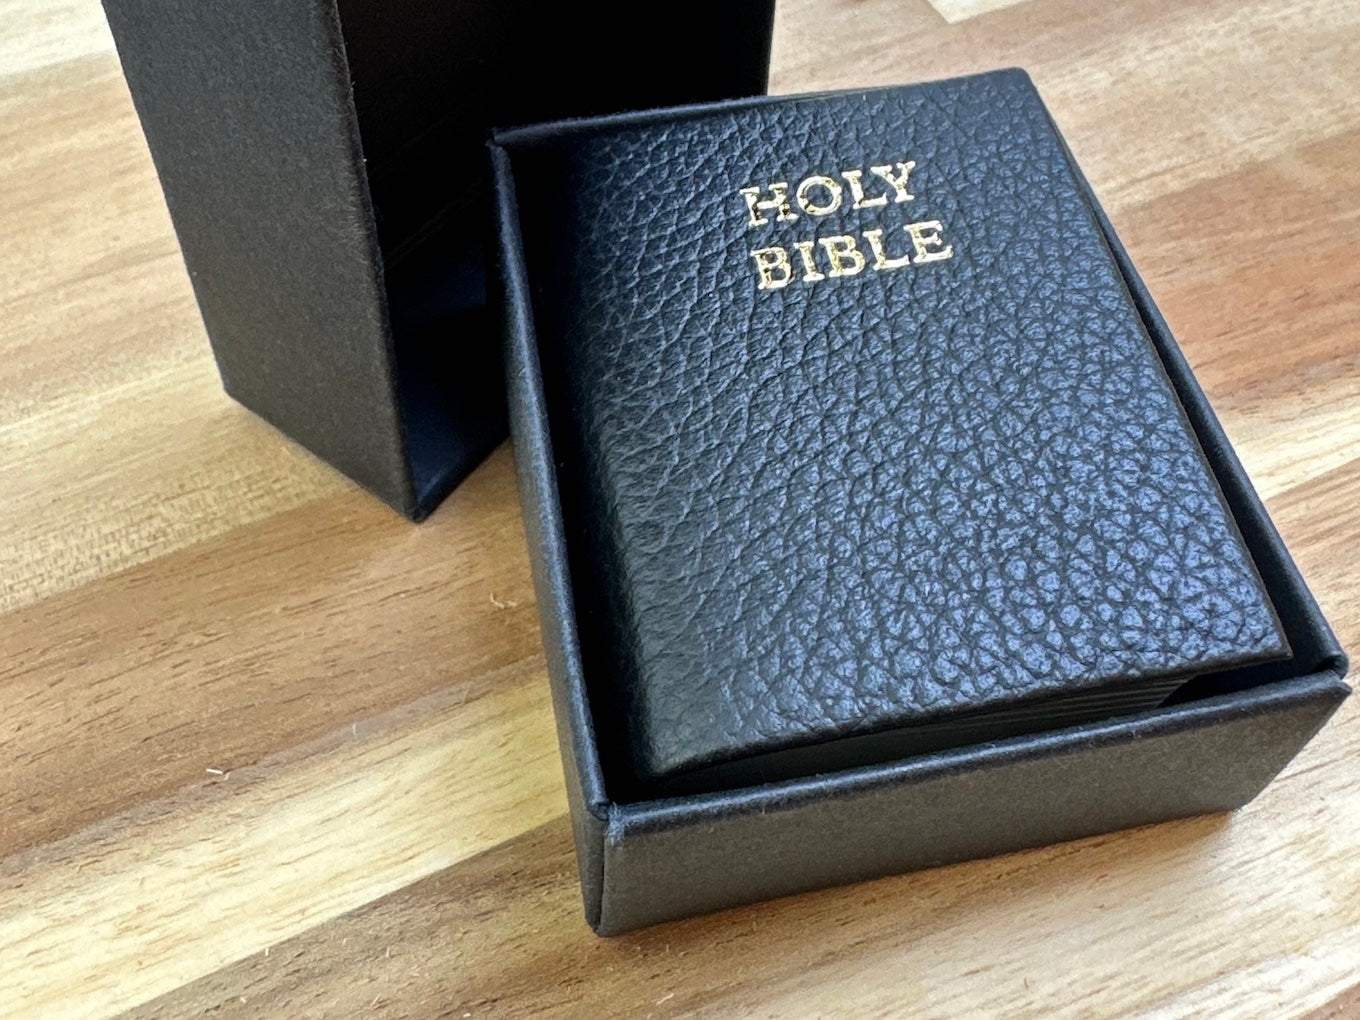 Tiny Bible comes in this snug, unmarked black box 